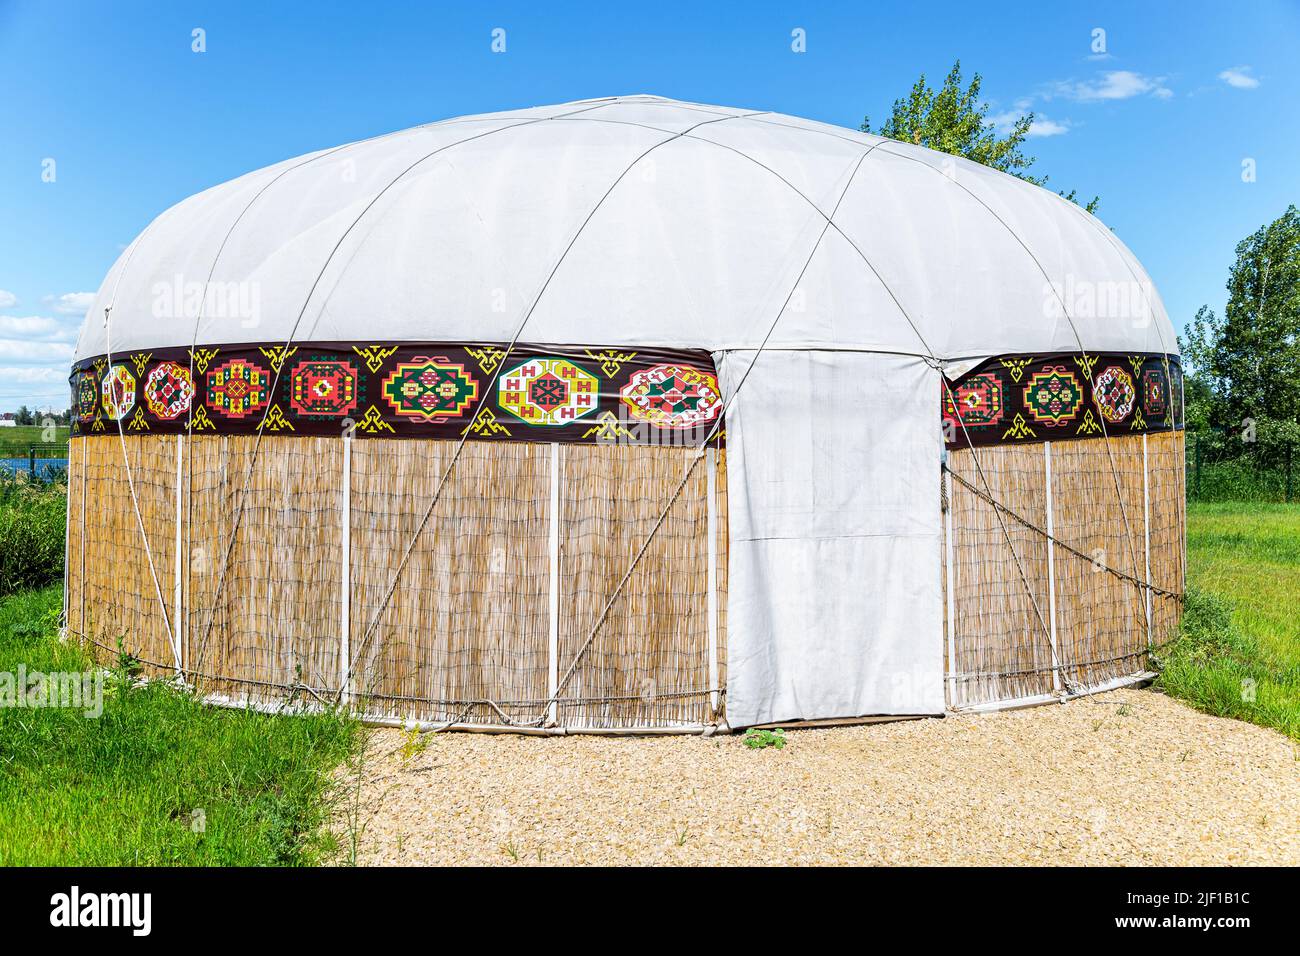 Yurt - national ancient house of the nomad peoples of Asian countries. Traditional Turkmen yurt Stock Photo